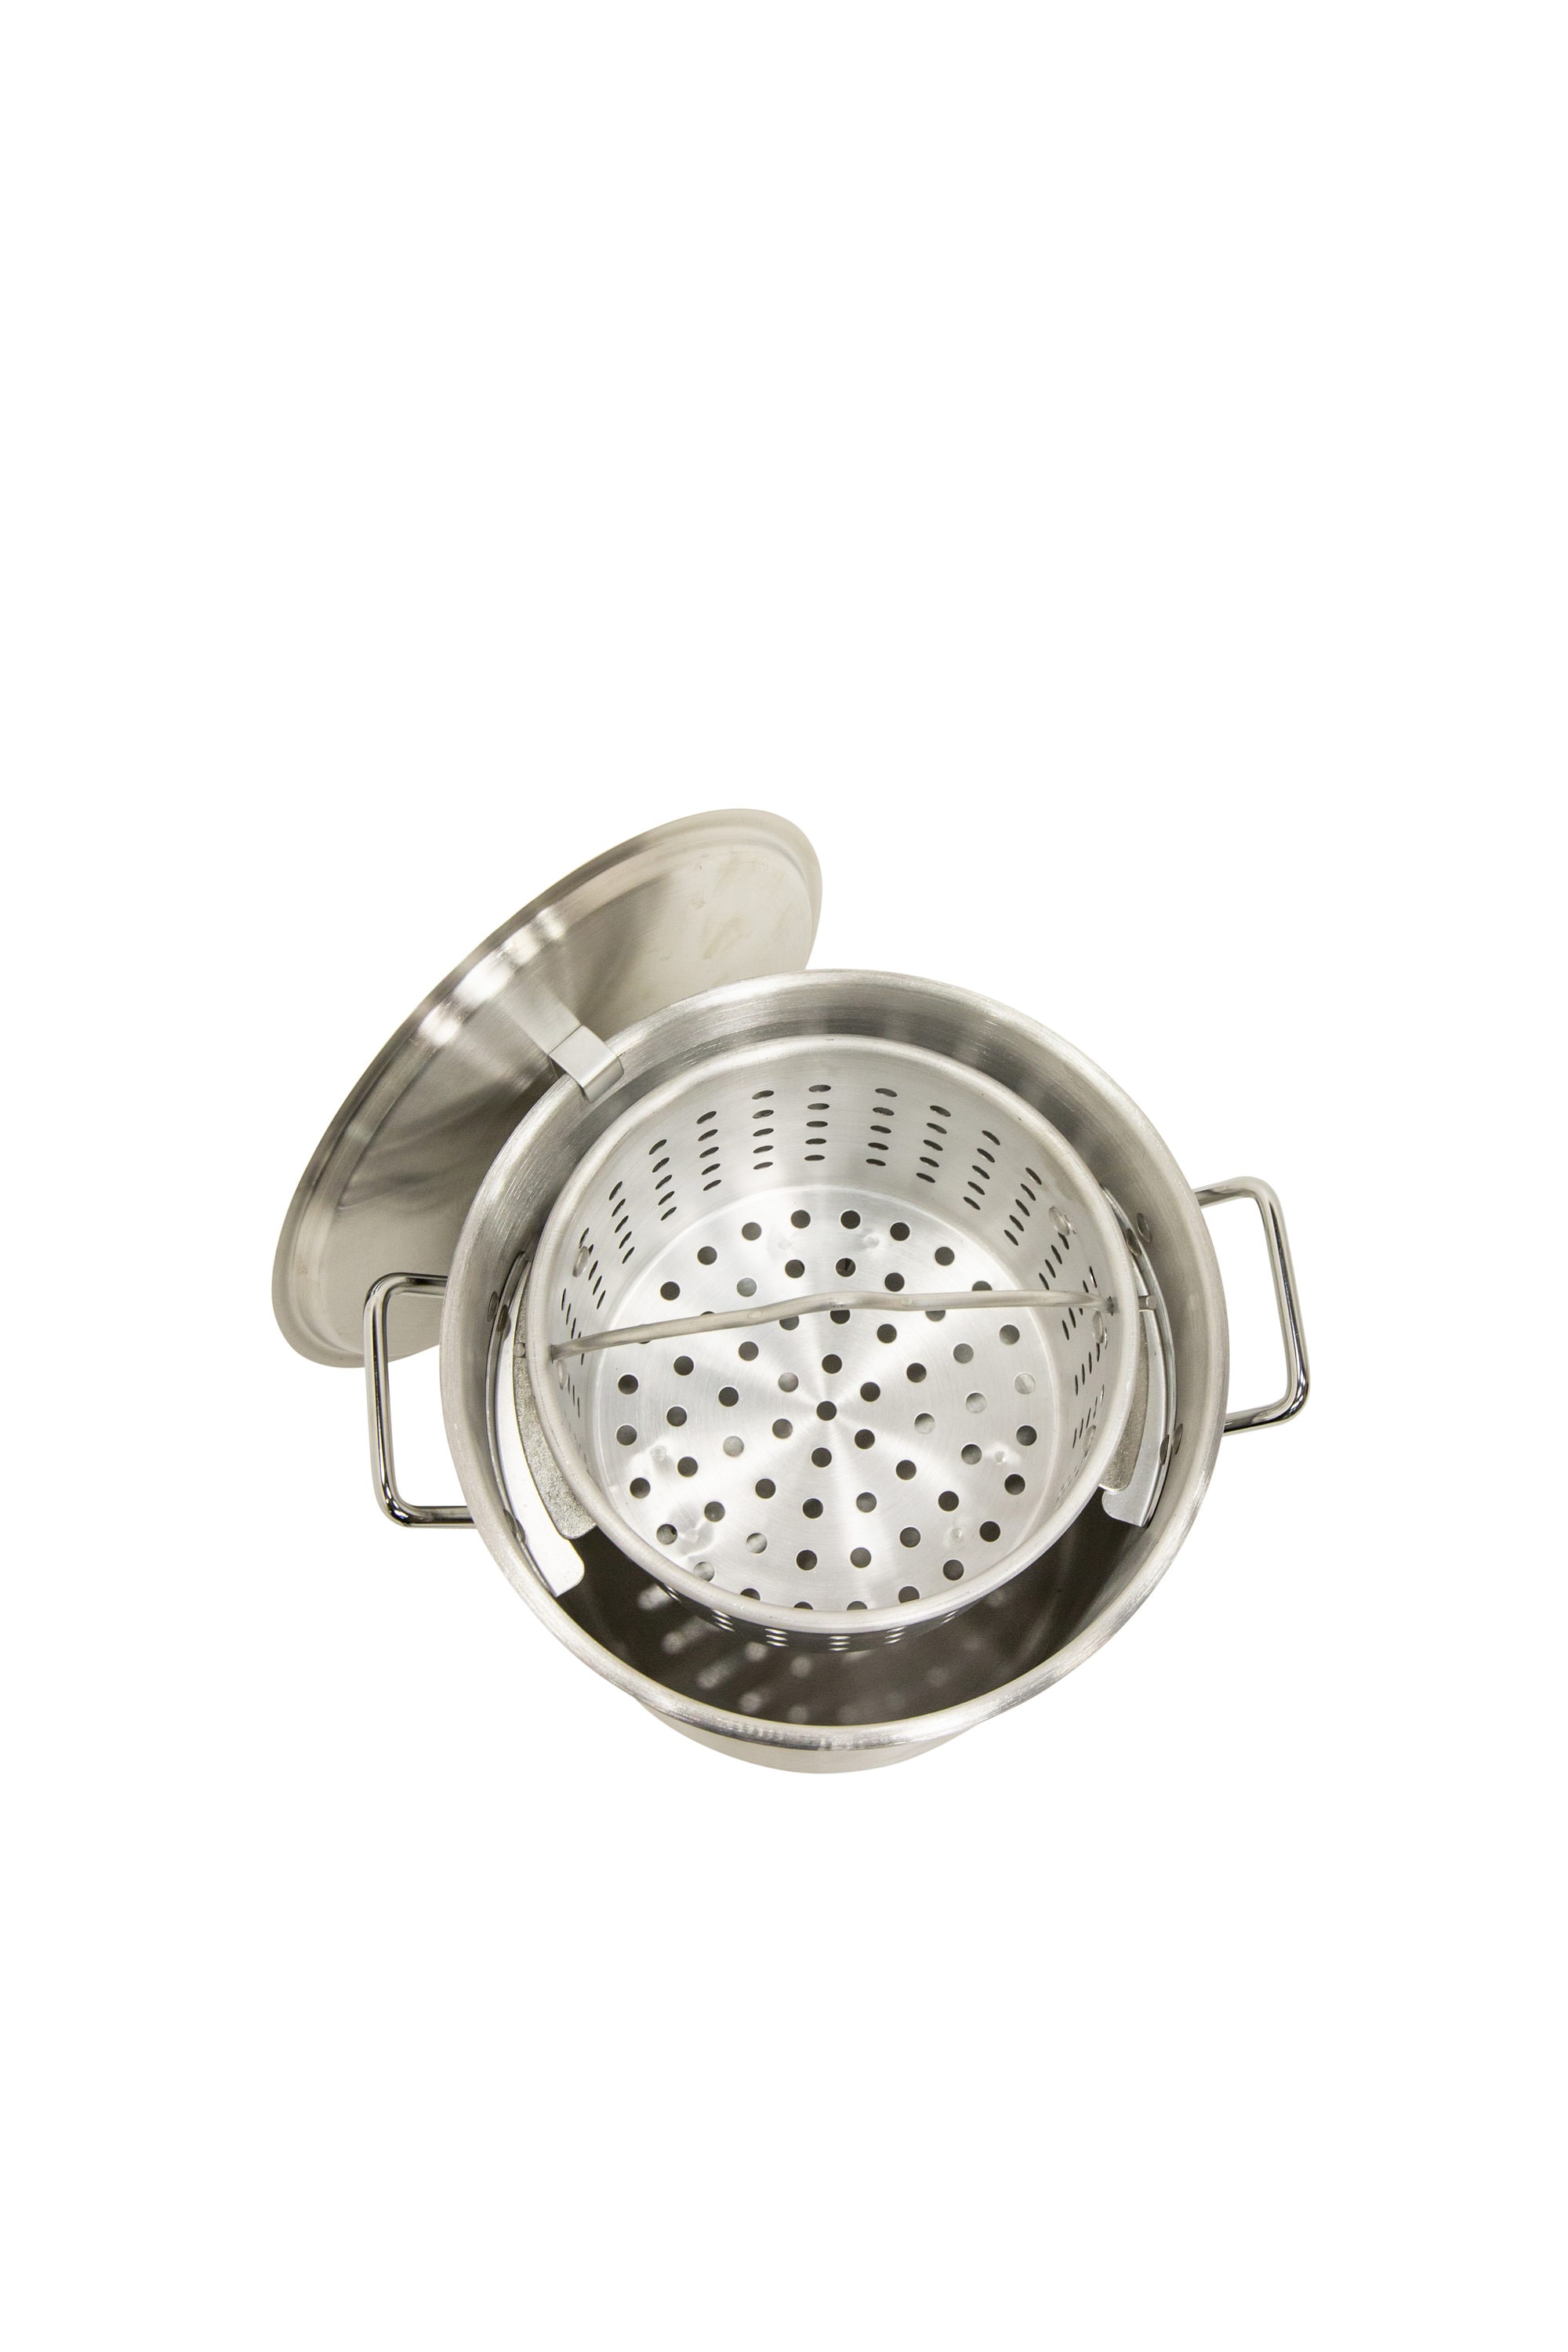 LoCo COOKERS 60-Quart Aluminum Stock Pot and Basket in the Cooking